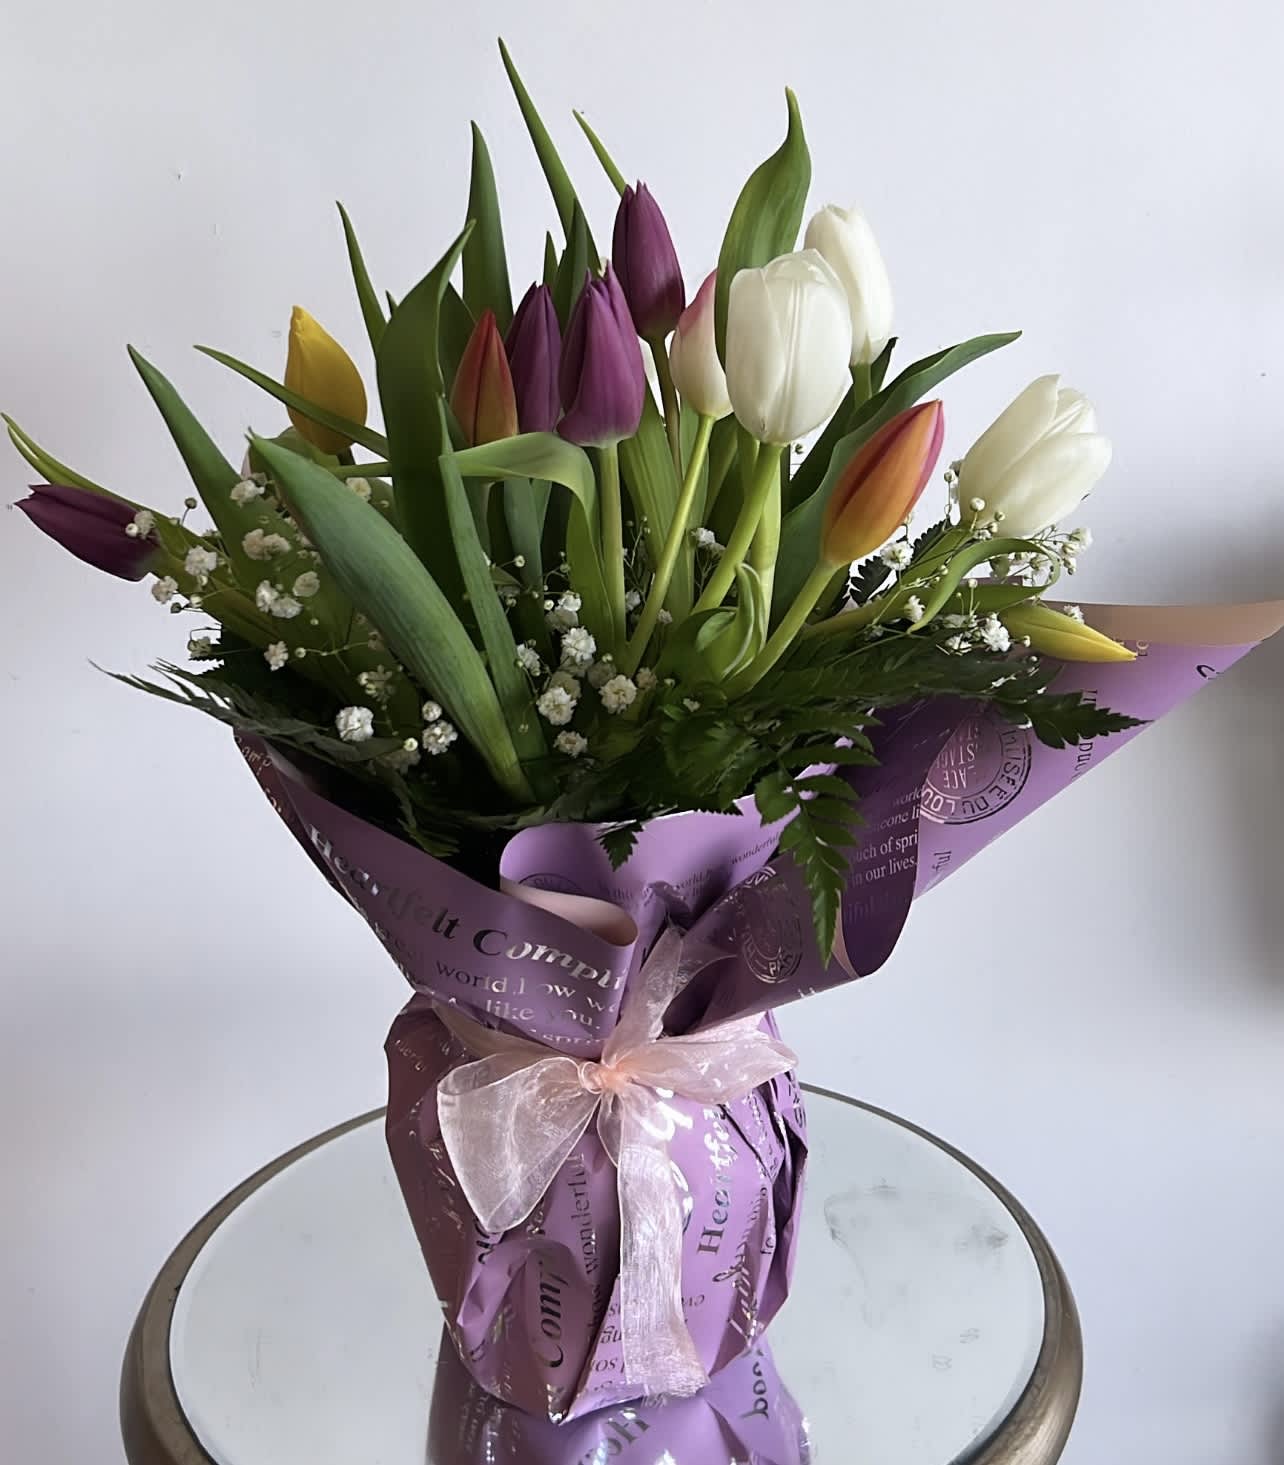 Timeless Tulips  - Cheerful tulips are nature’s way of saying, Spring is here! Our timeless bouquet is filled with these feel-good blooms in a bunch of bright colors. Gathered in a clear glass vase finished with a raffia bow, it’s an everyday gift of instant happiness.